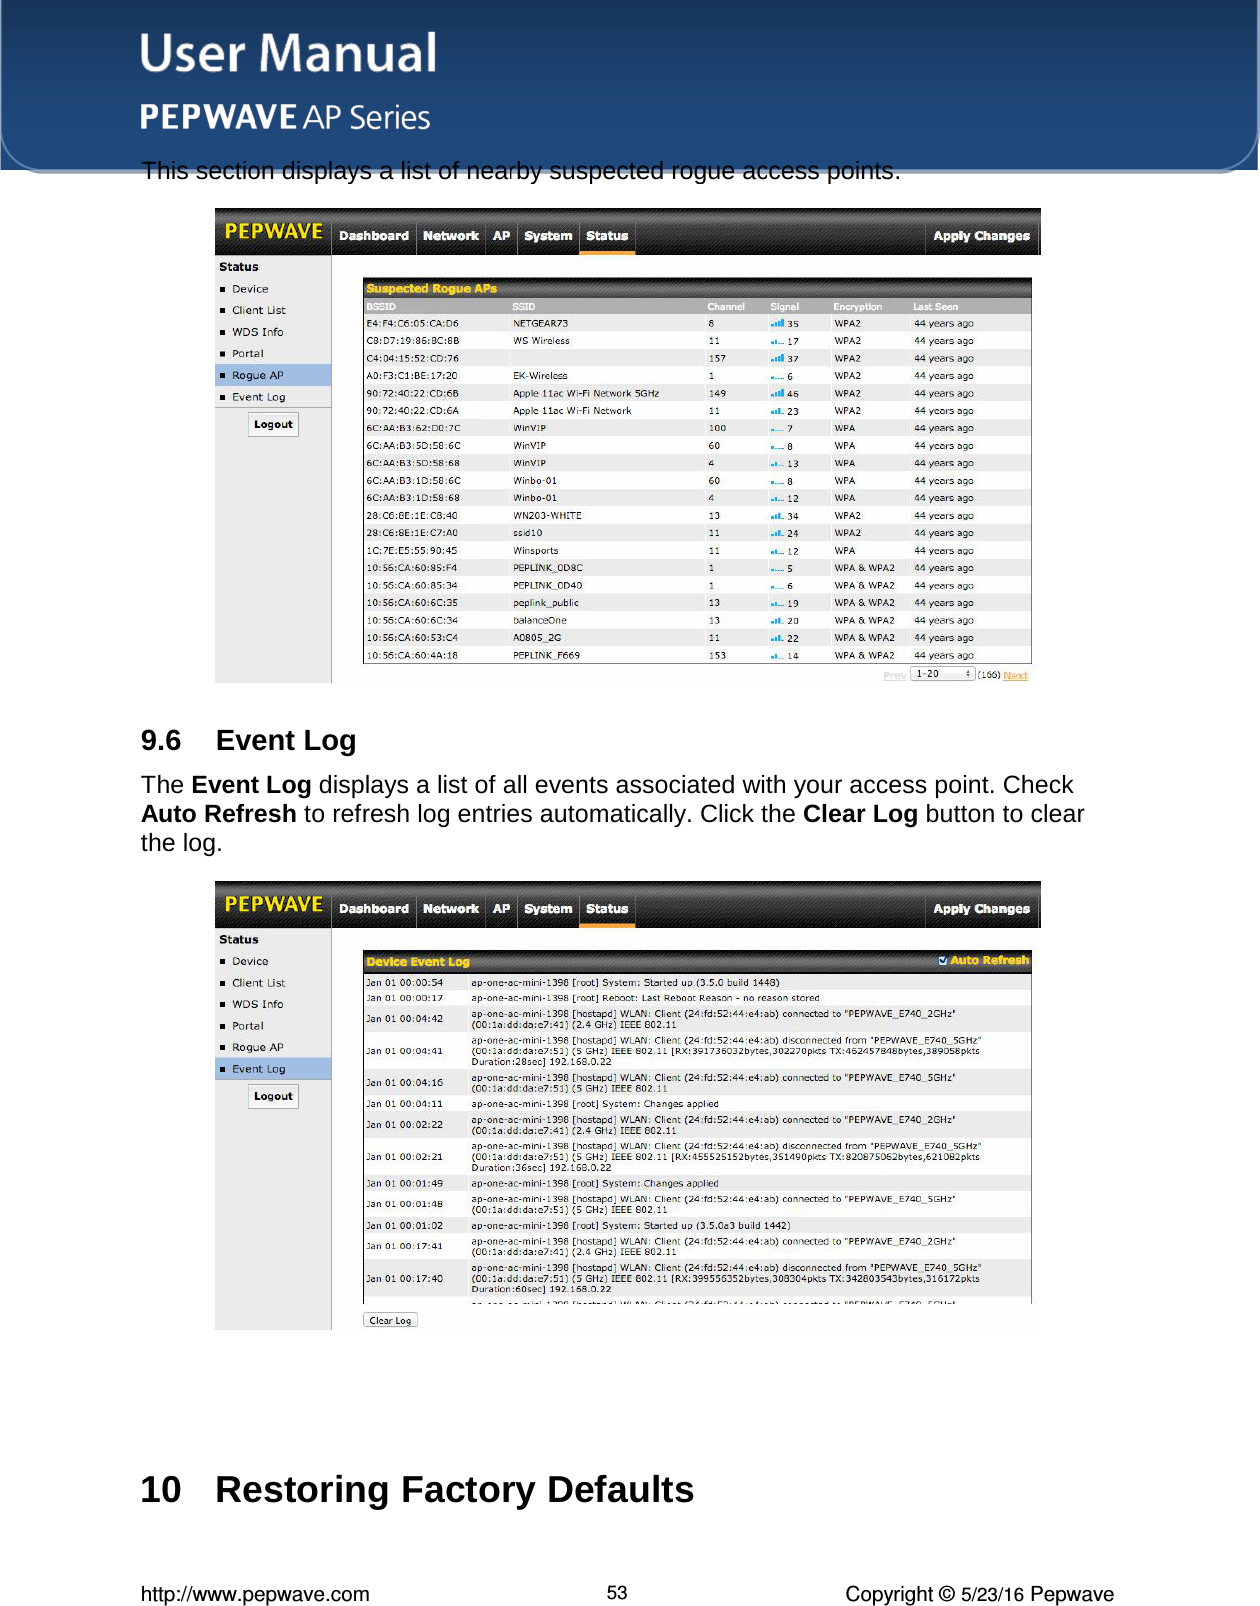 http://www.pepwave.com 53 Copyright © 5/23/16 Pepwave  9.6  Event Log The Event Log displays a list of all events associated with your access point. Check Auto Refresh to refresh log entries automatically. Click the Clear Log button to clear the log.      10  Restoring Factory Defaults 